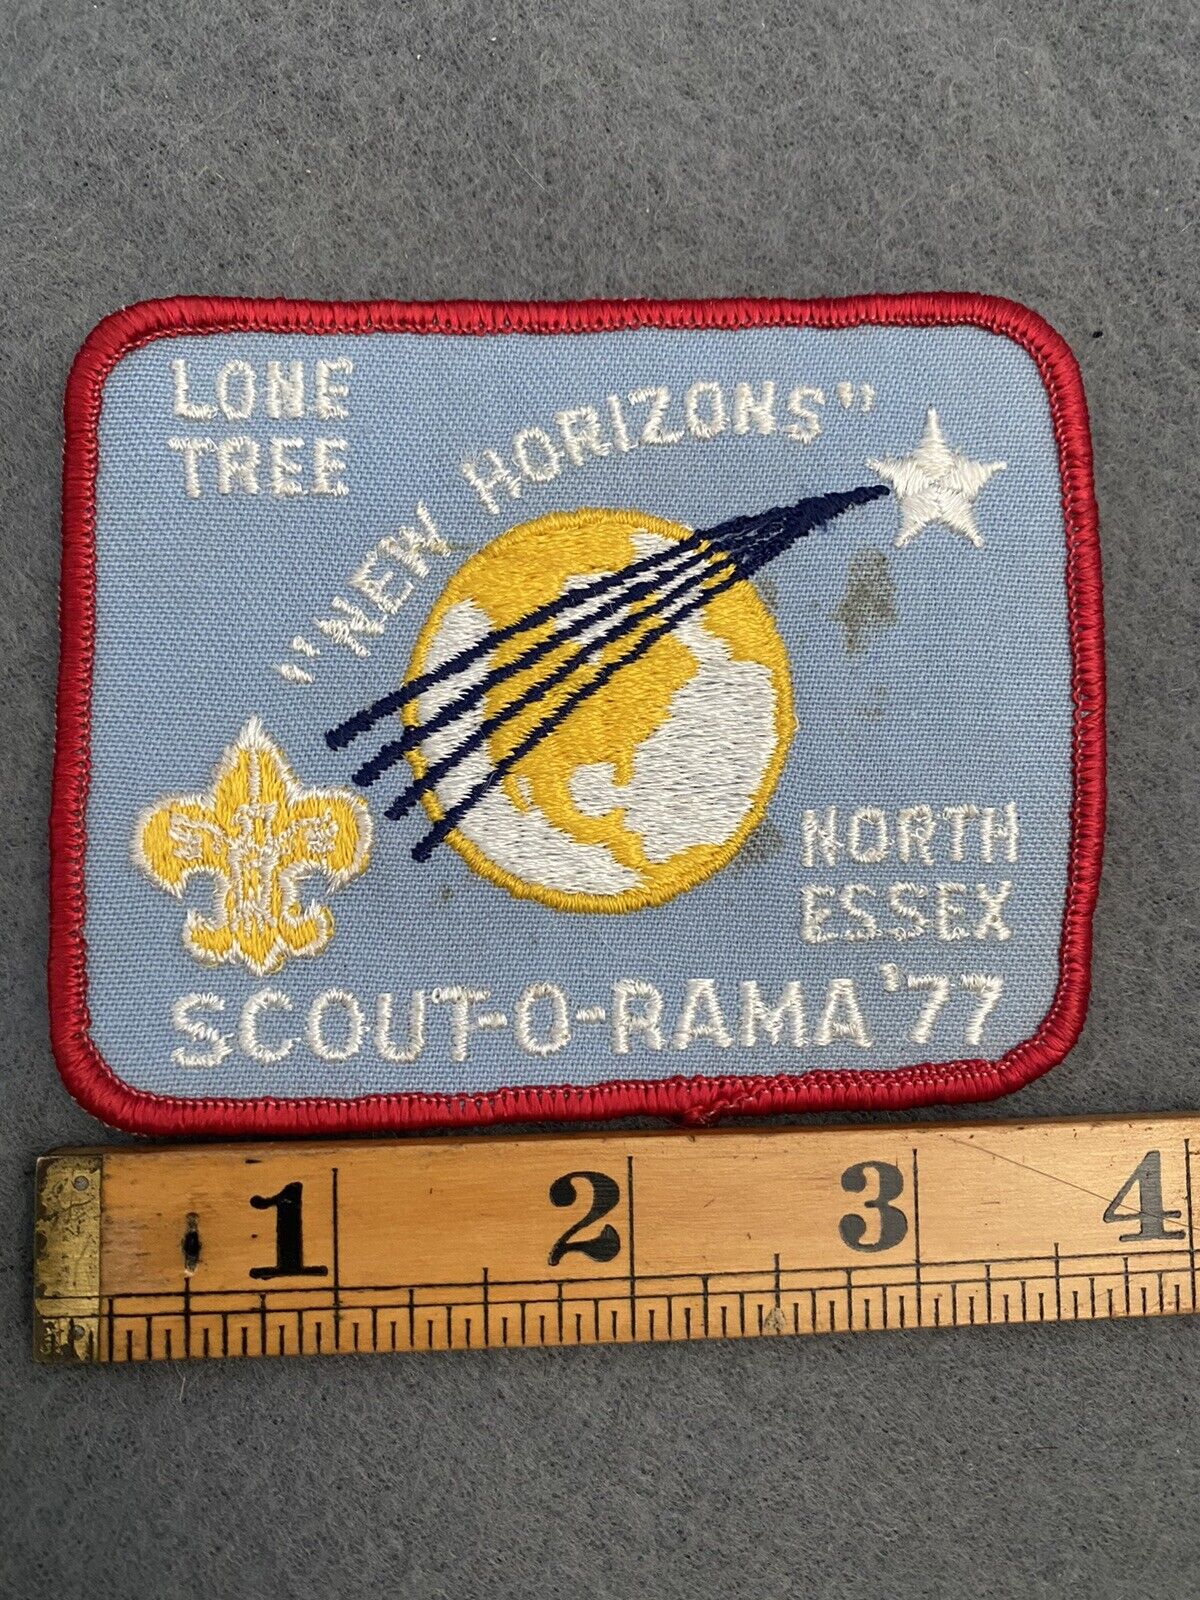 1972 Lone Tree Council North Essex Scout-O-Rama Boy Scout BSA Patch B3